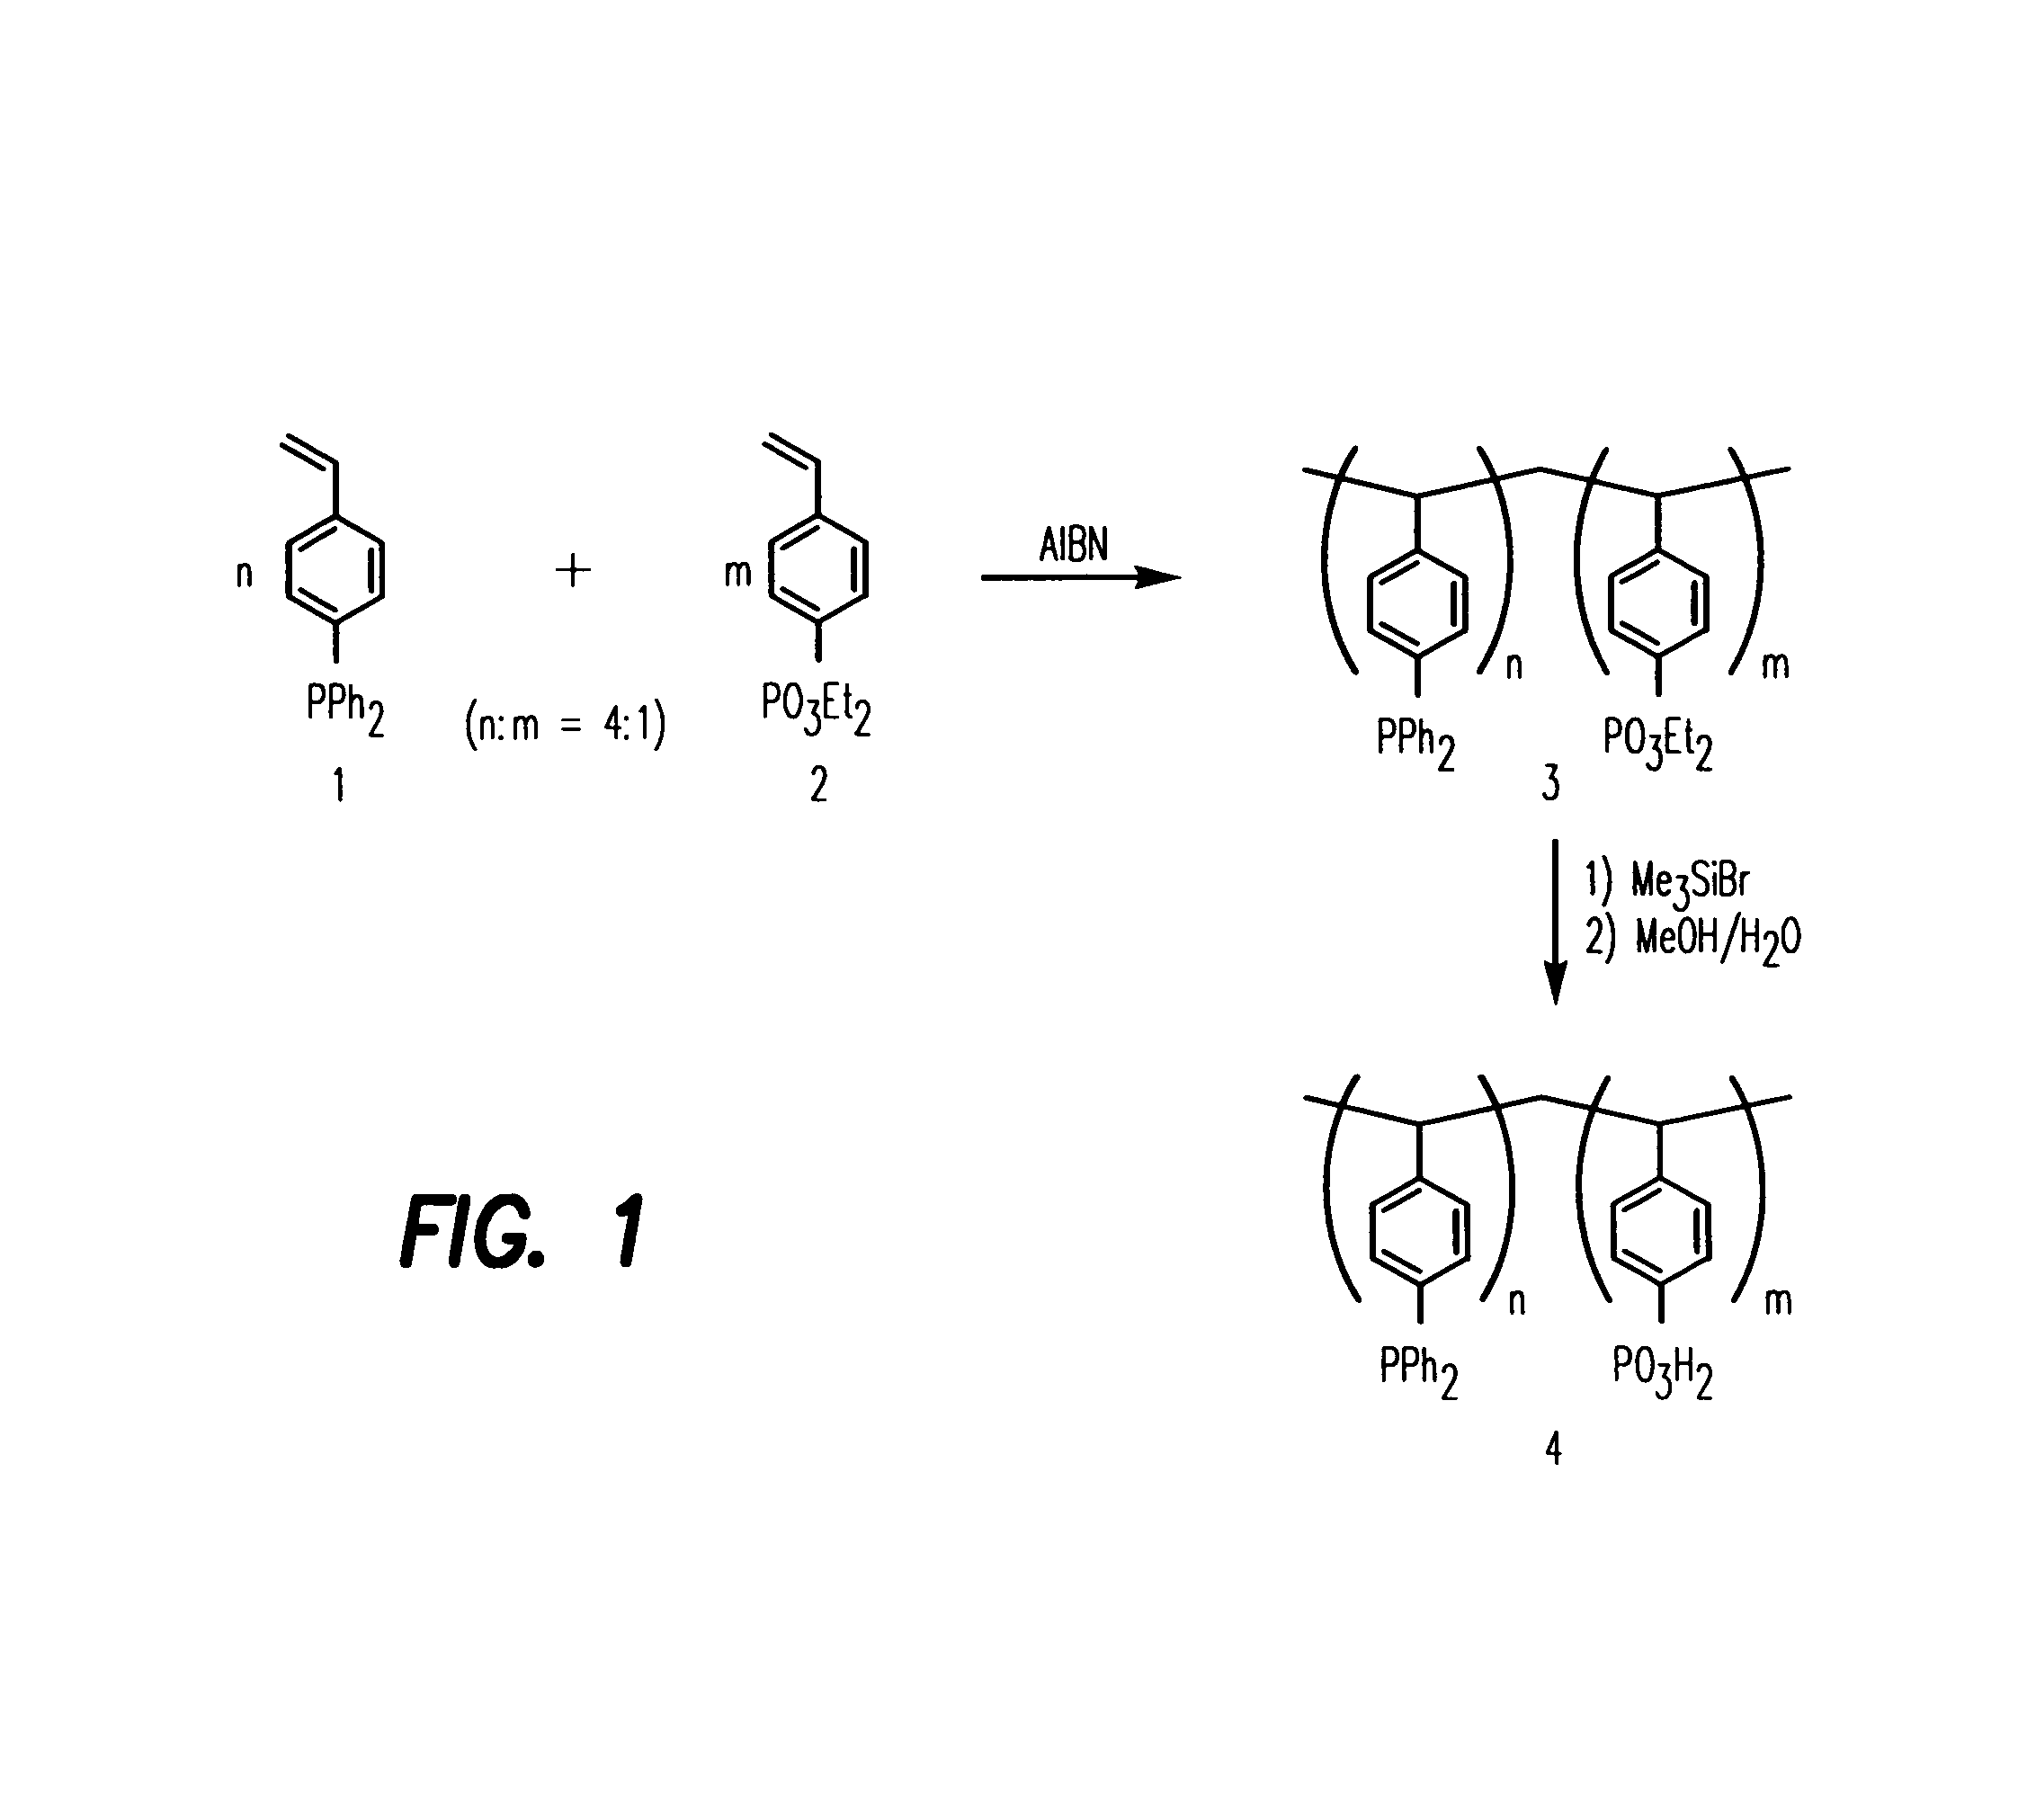 Materials and methods for immobilization of catalysts on surfaces and for selective electroless metallization